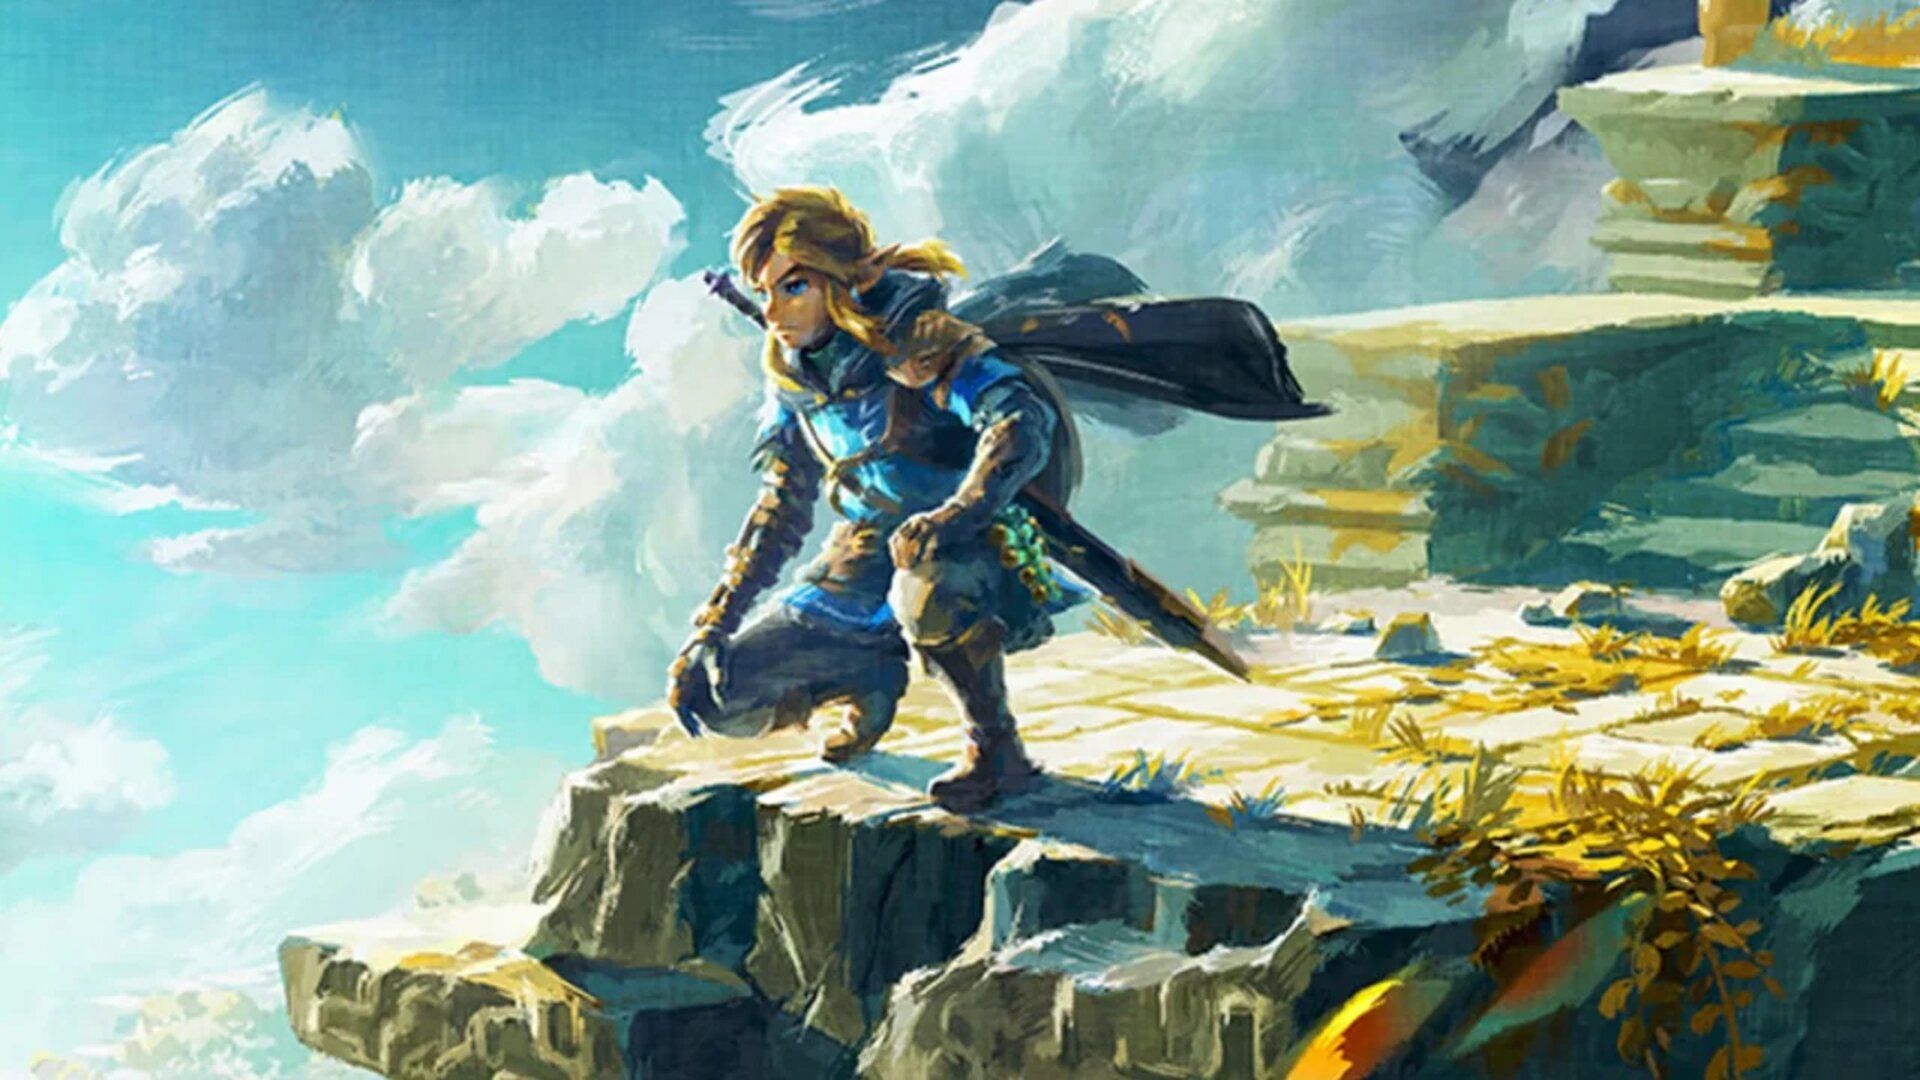 Gamespot has TOTK as their #1 Zelda game of all time : r/gaming